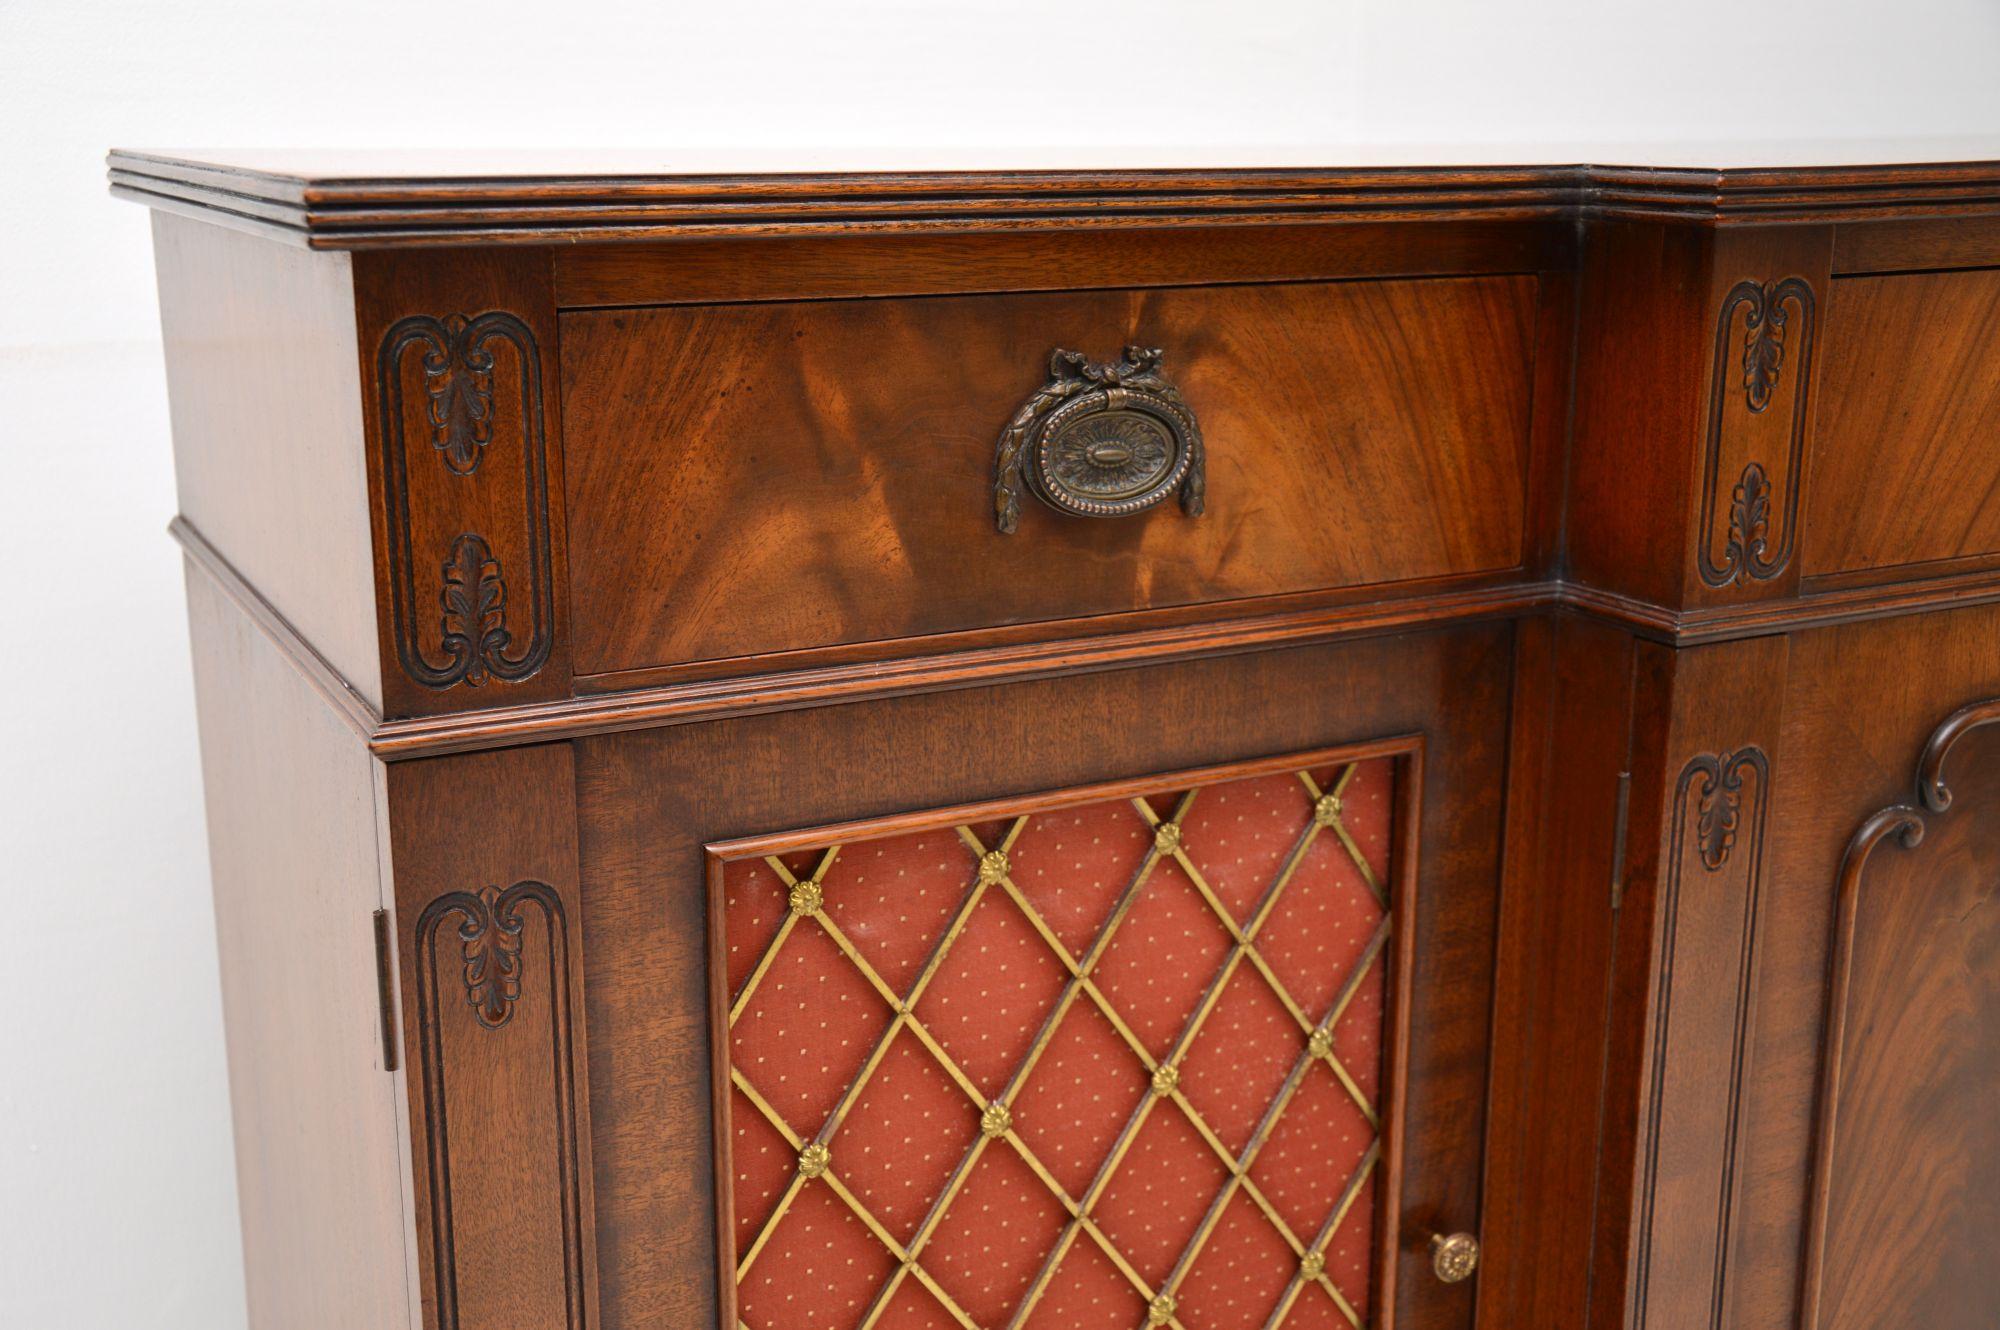 British Antique Regency Style Mahogany Grill Front Sideboard